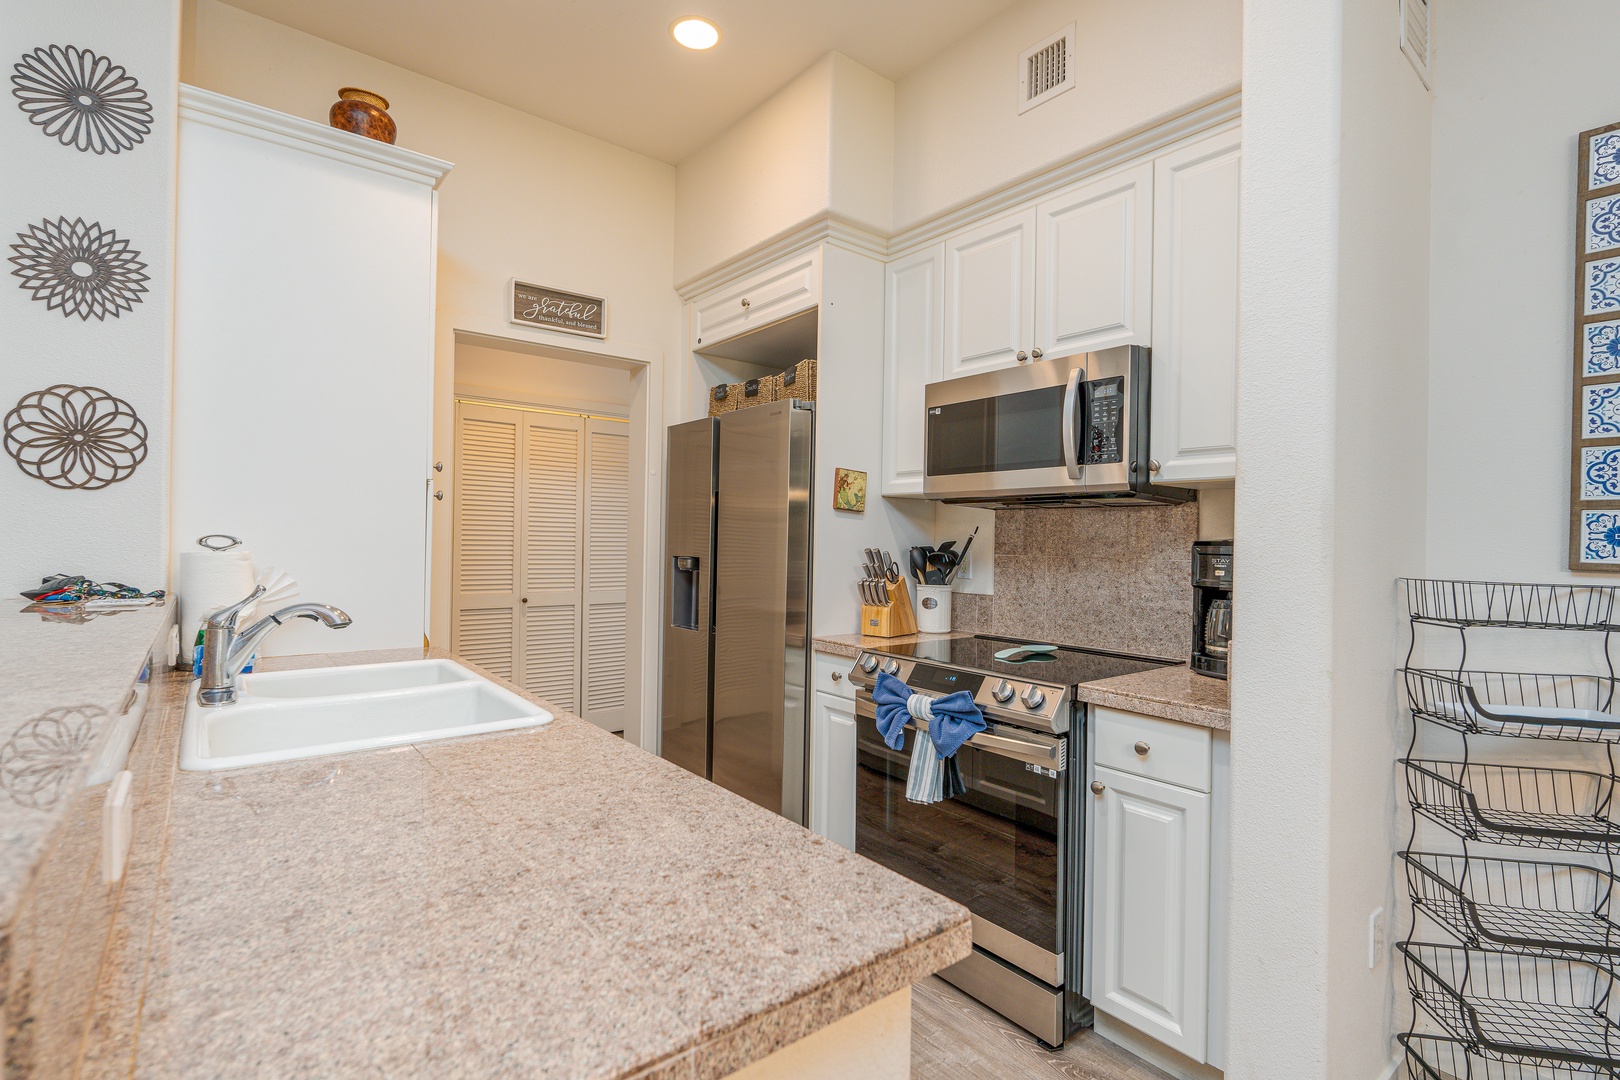 Kapolei Vacation Rentals, Coconut Plantation 1208-2 - The spacious kitchen has all your needs for a relaxing vacation.